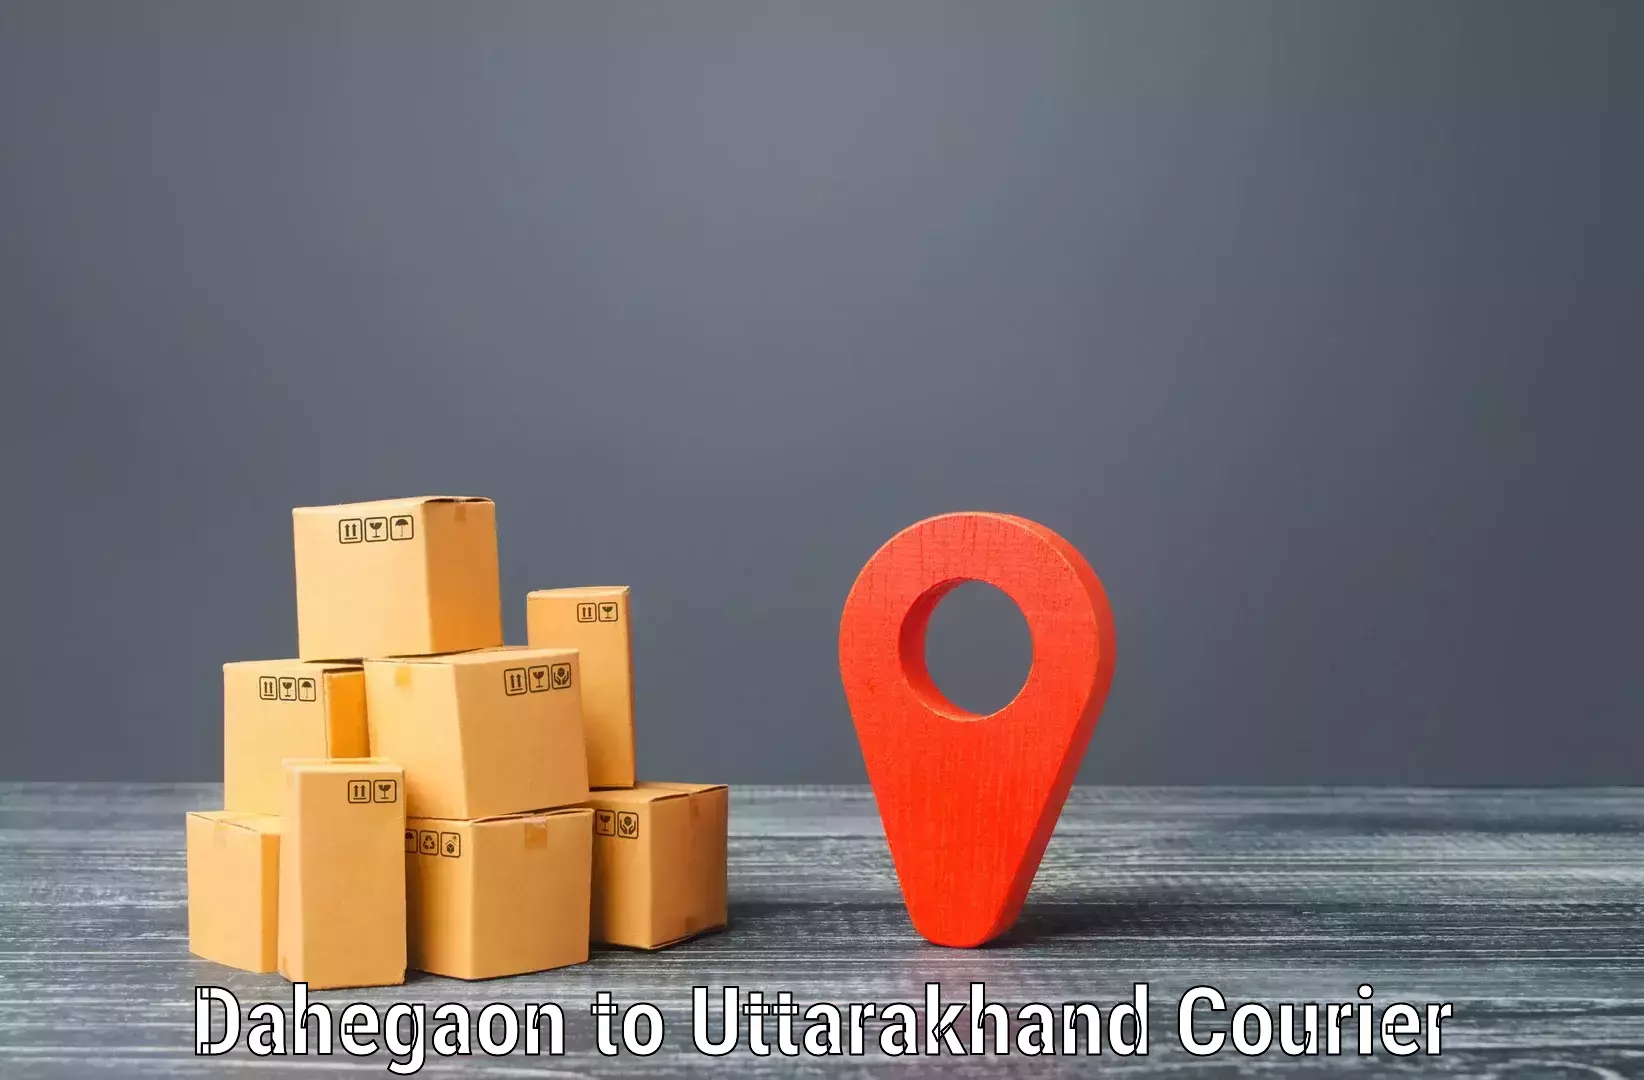 Same-day delivery solutions Dahegaon to Uttarakhand